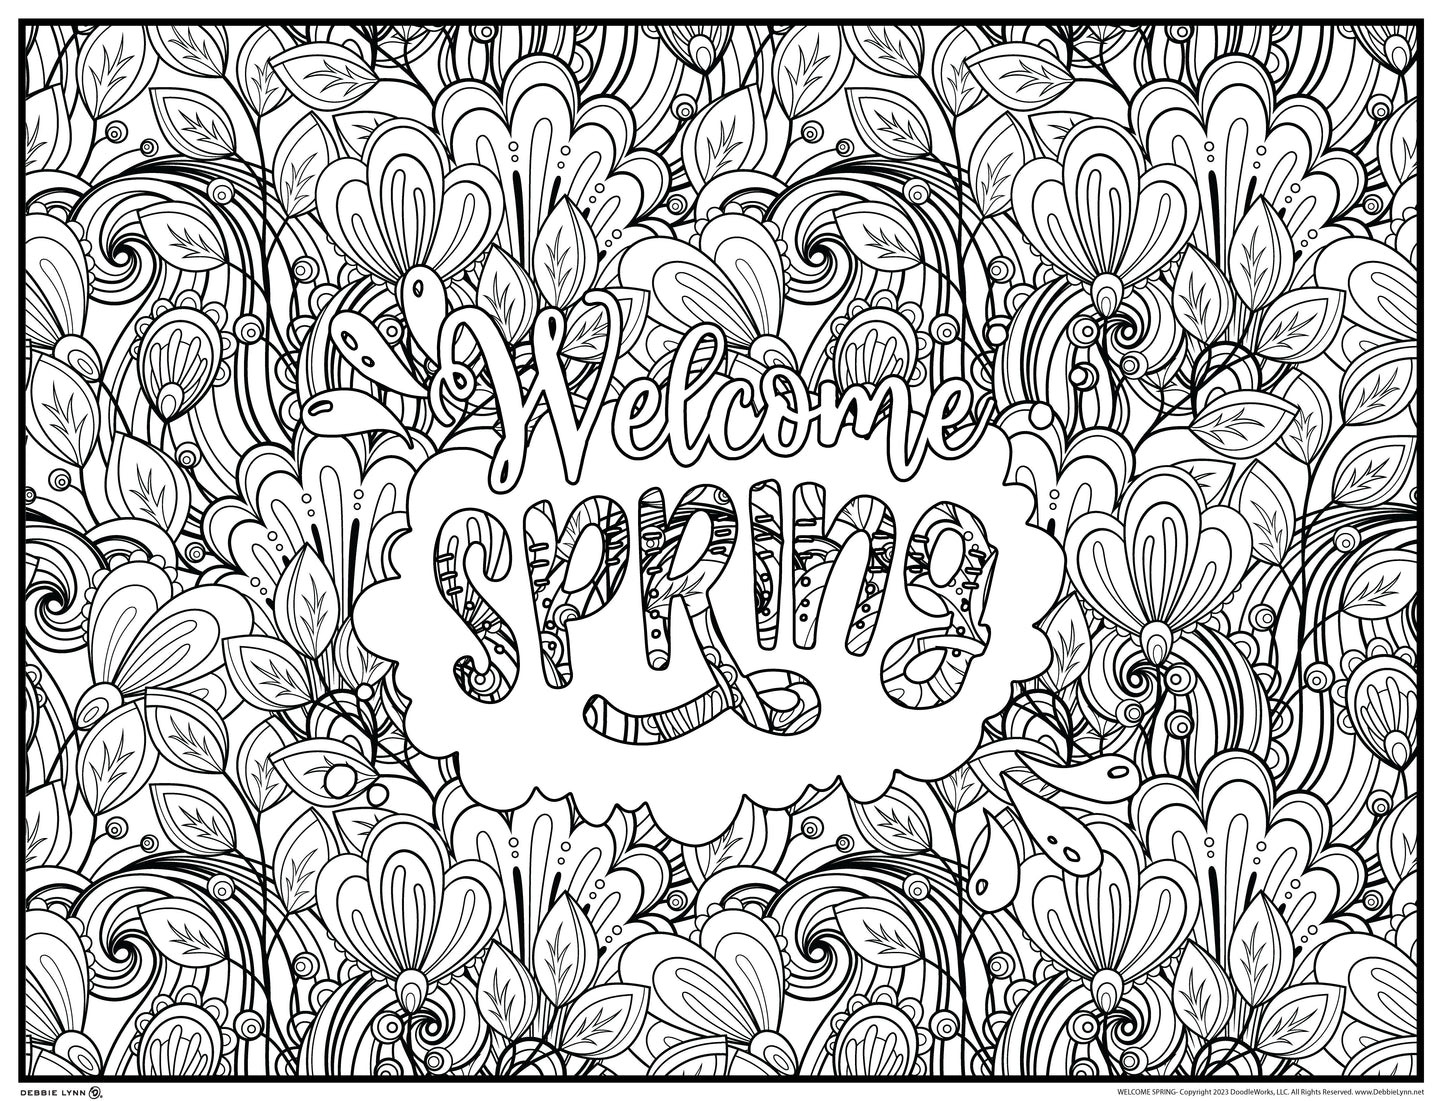 Welcome Spring Personalized Giant Coloring Poster 46"x60"